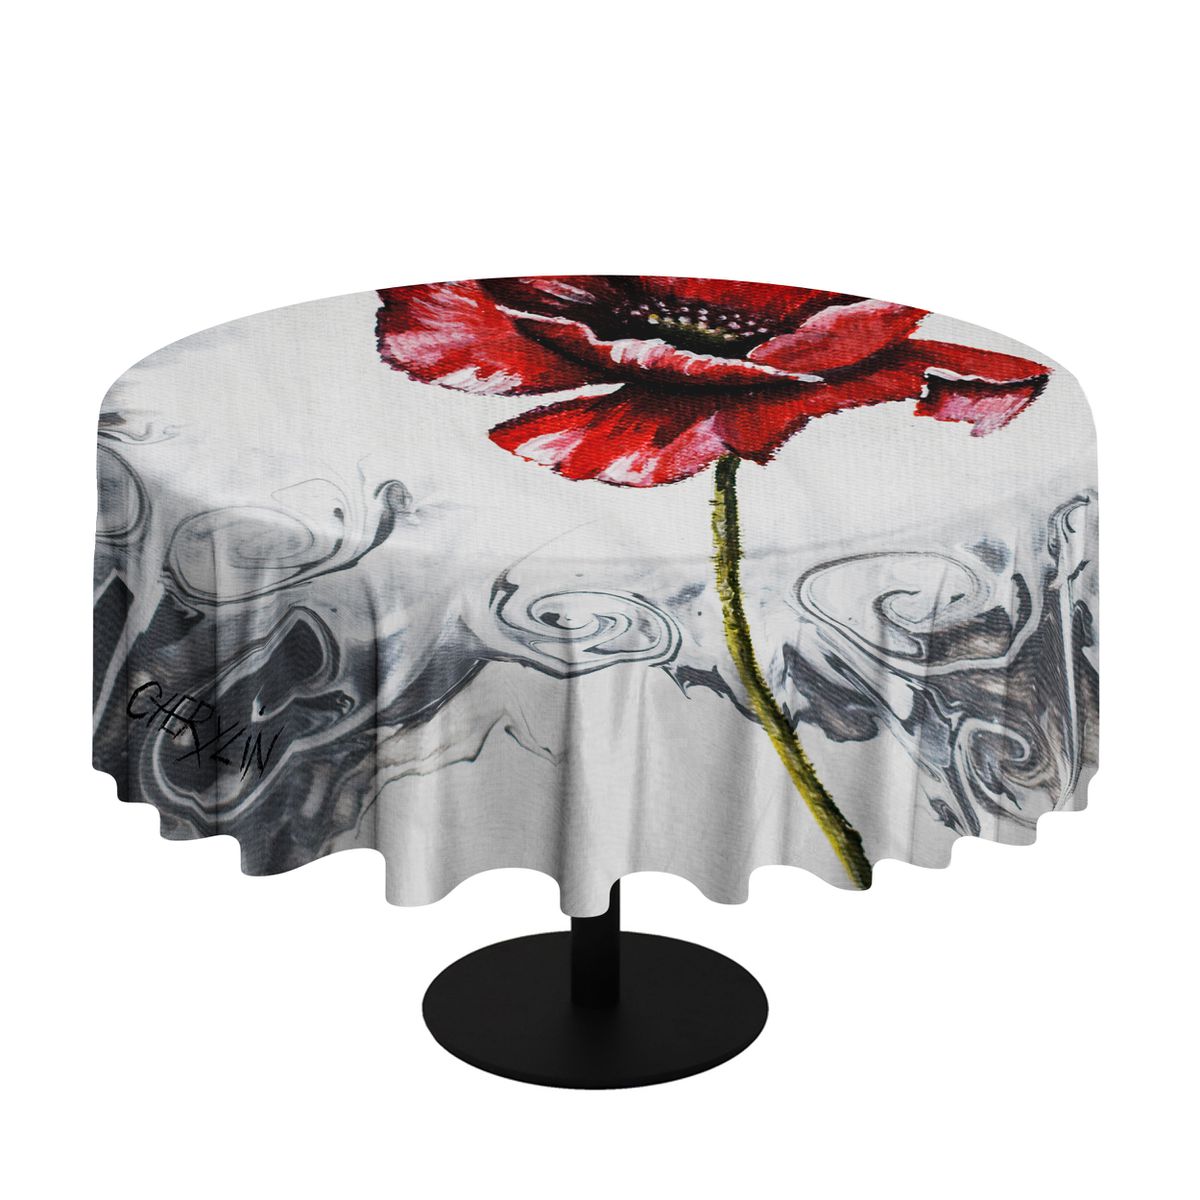 Pouring Poppies Twirls By Cherylin Louw Round Tablecloth